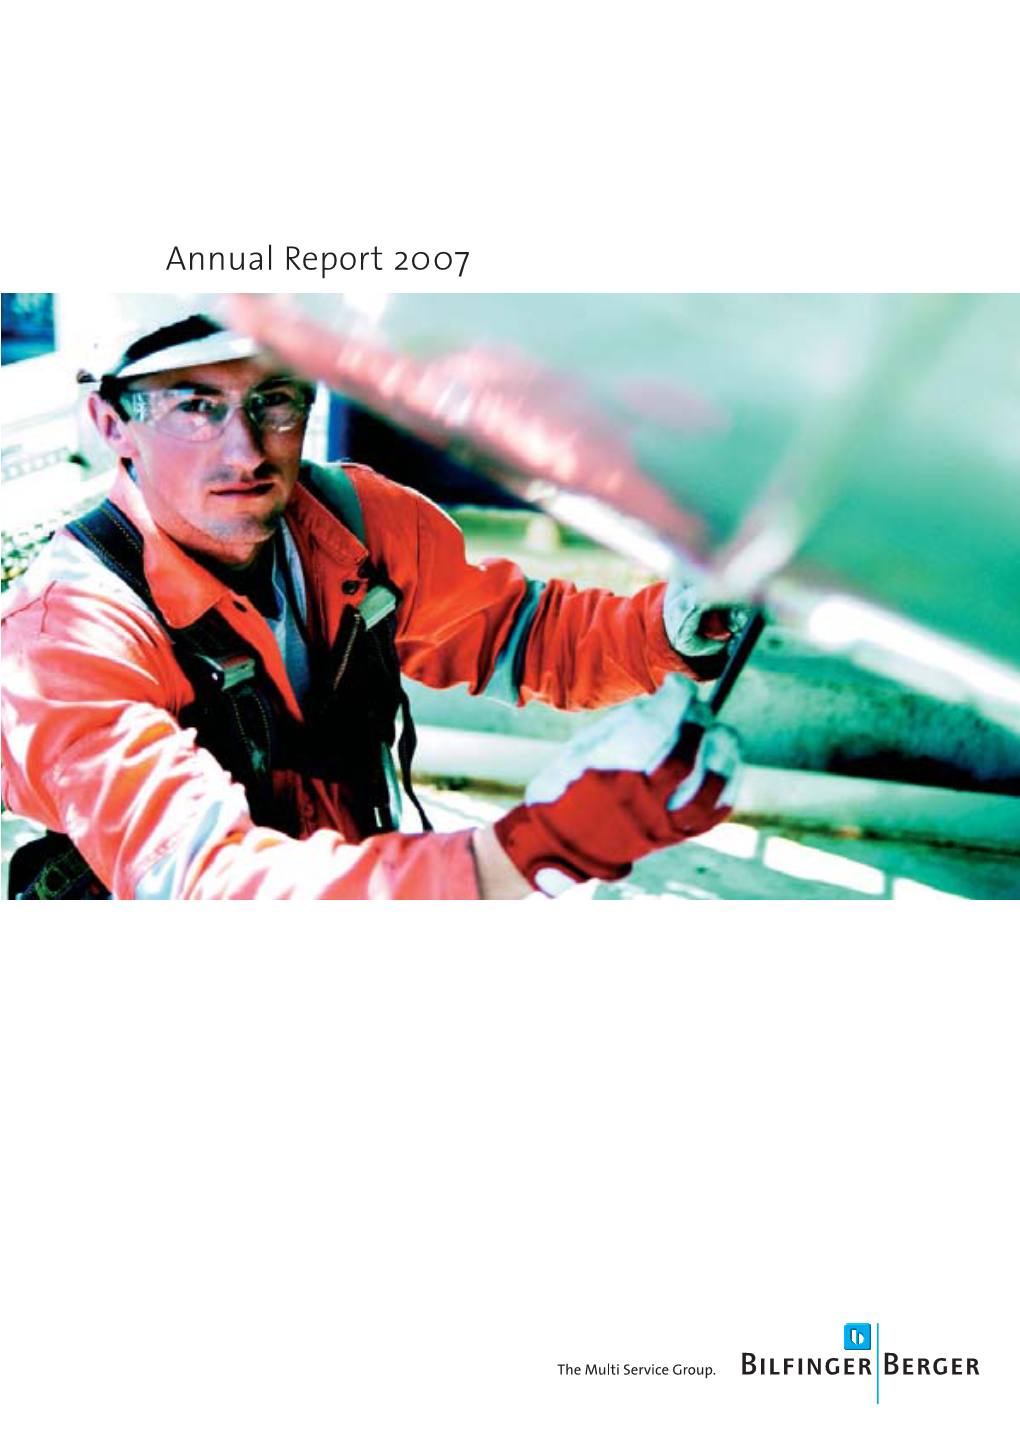 Annual Report 2007 Key Figures